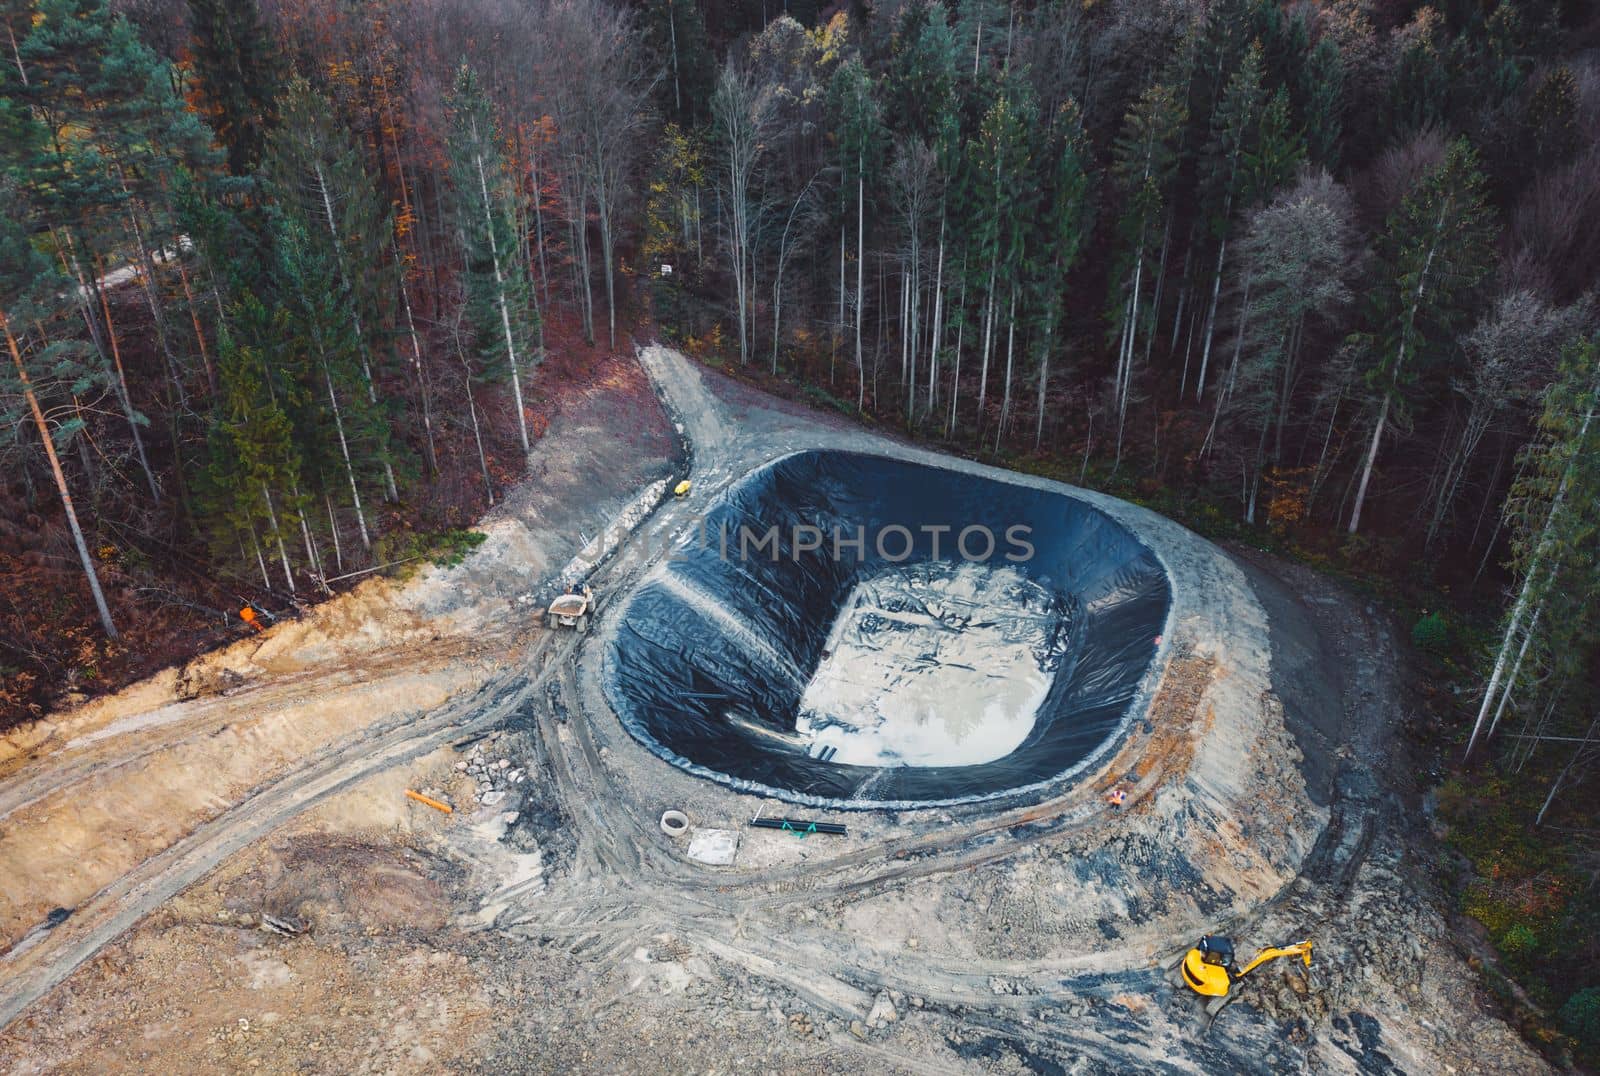 Aerial view of construction site somewhere in the country side of Slovenia.